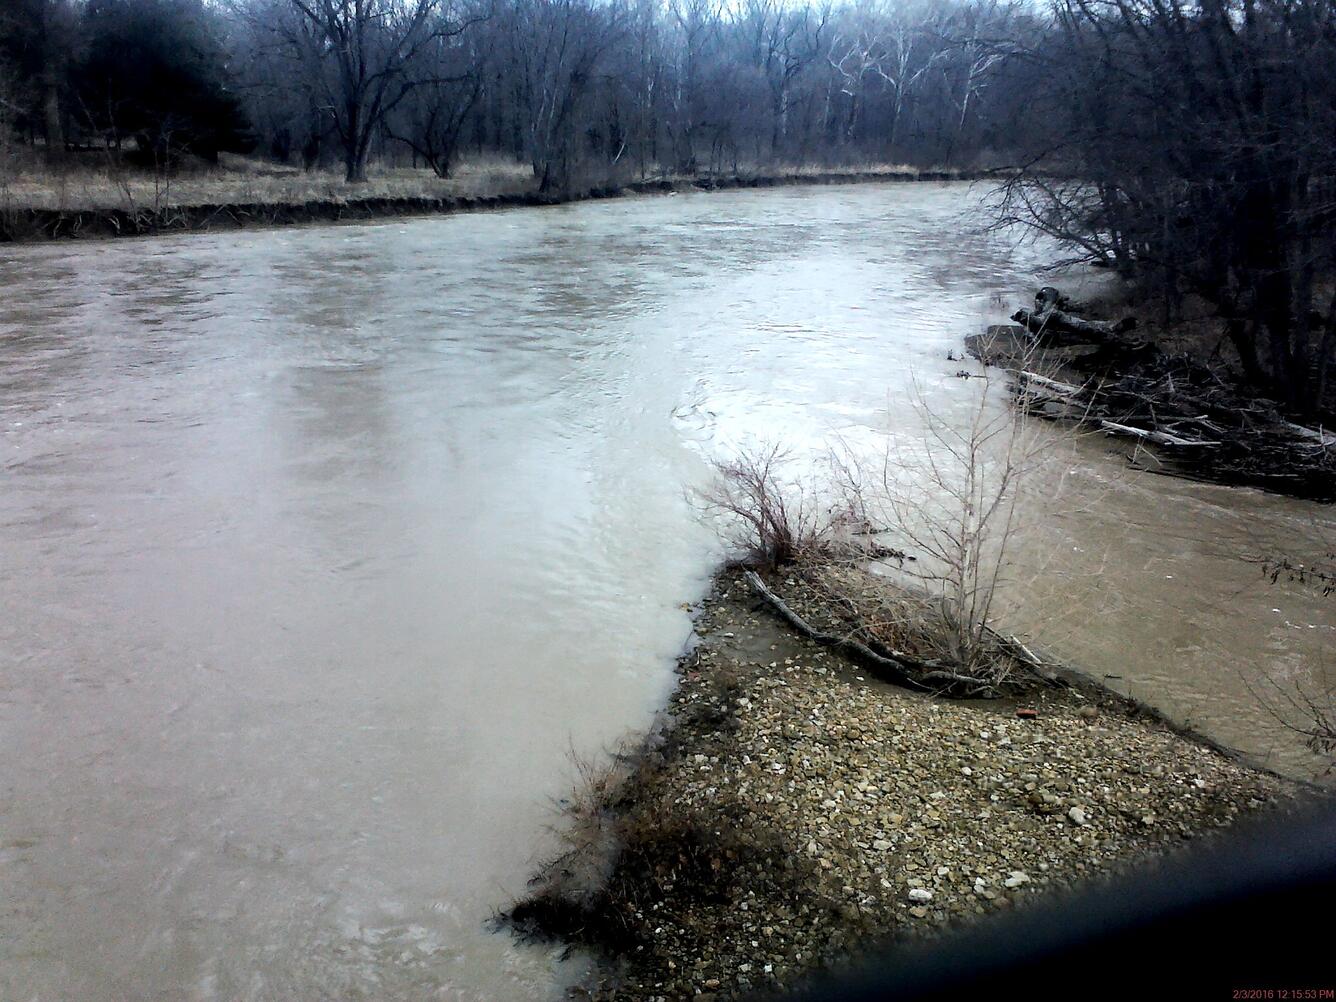 Grand River near Painesville, OH - downstream of gage